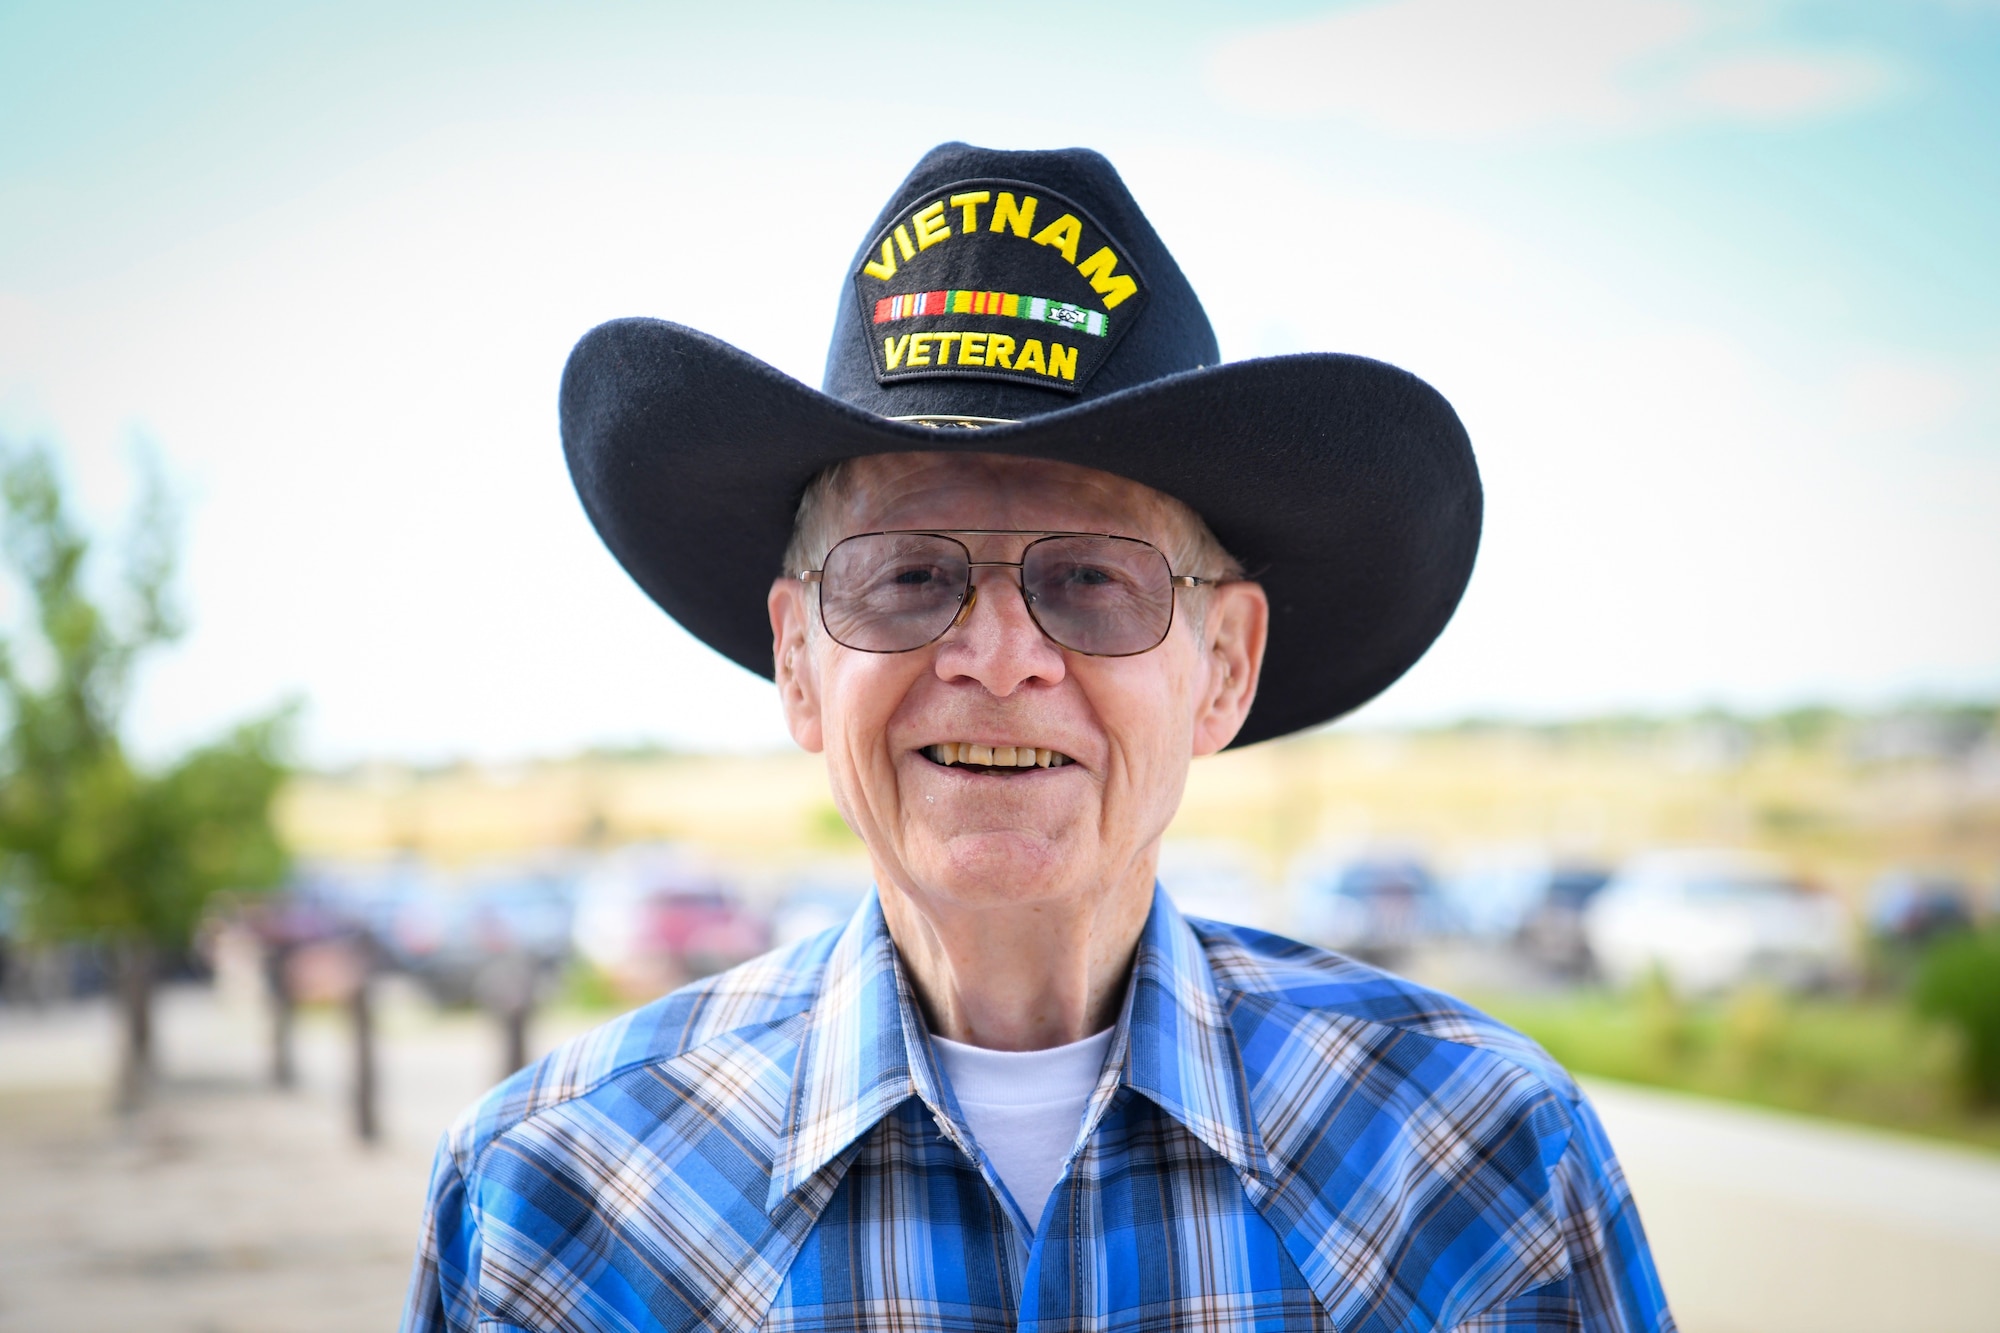 Ron McGregor, retired Air Force veteran, attends Military Retiree Appreciation Day, July 27, 2019, Buckley Air Force Base, Colo. McGregor served 26 years in the Air Force as a targeting officer in the Vietnam War. (U.S. Air Force photo by Airman 1st Class Michael D. Mathews)